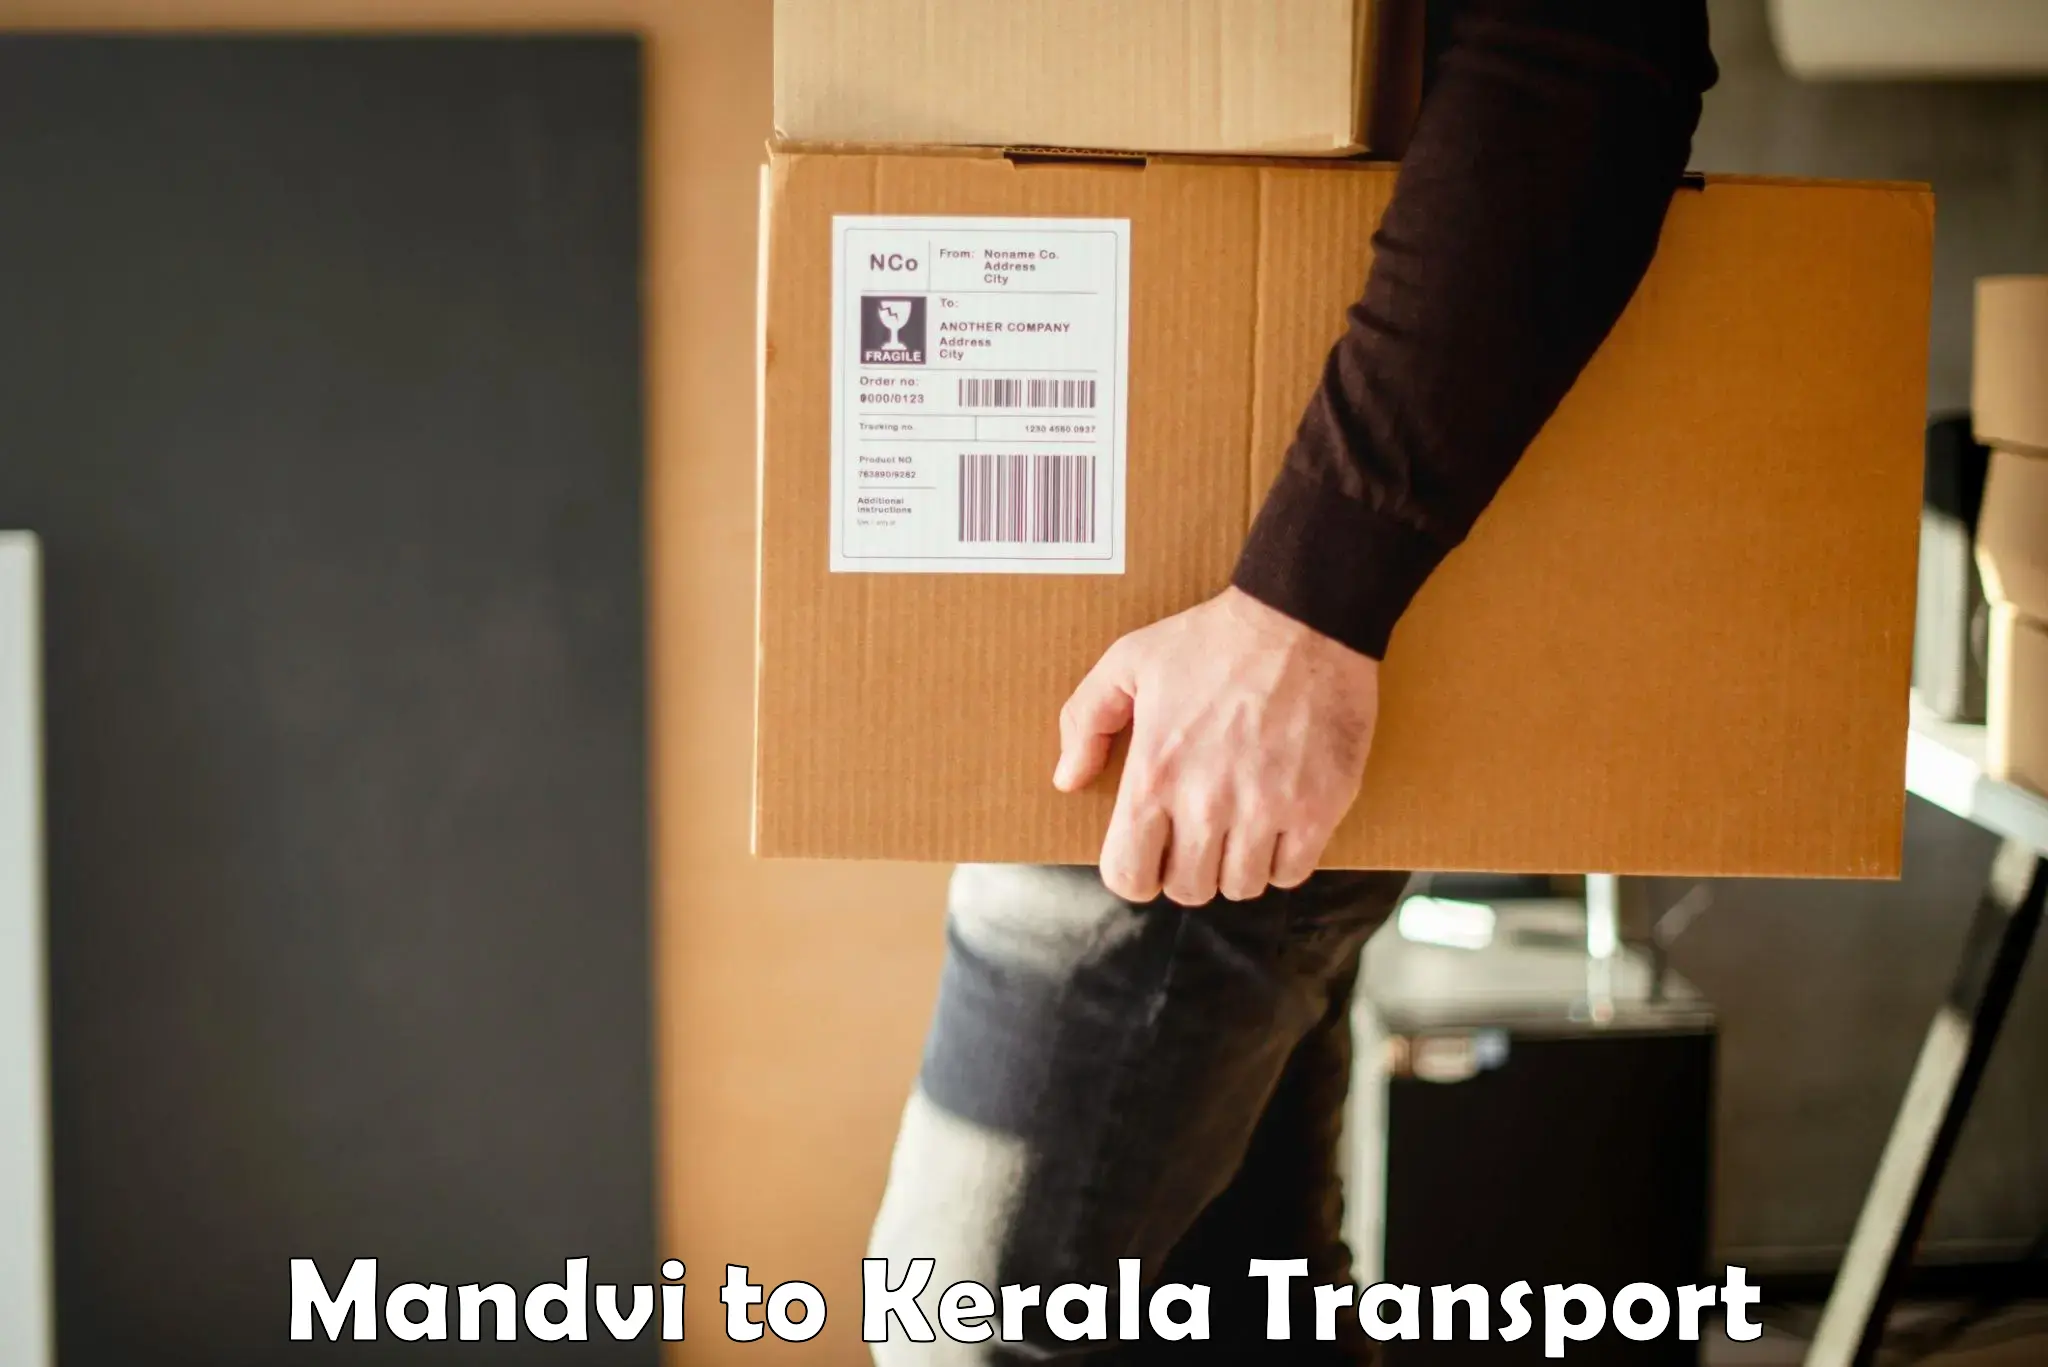 Truck transport companies in India Mandvi to Kozhikode